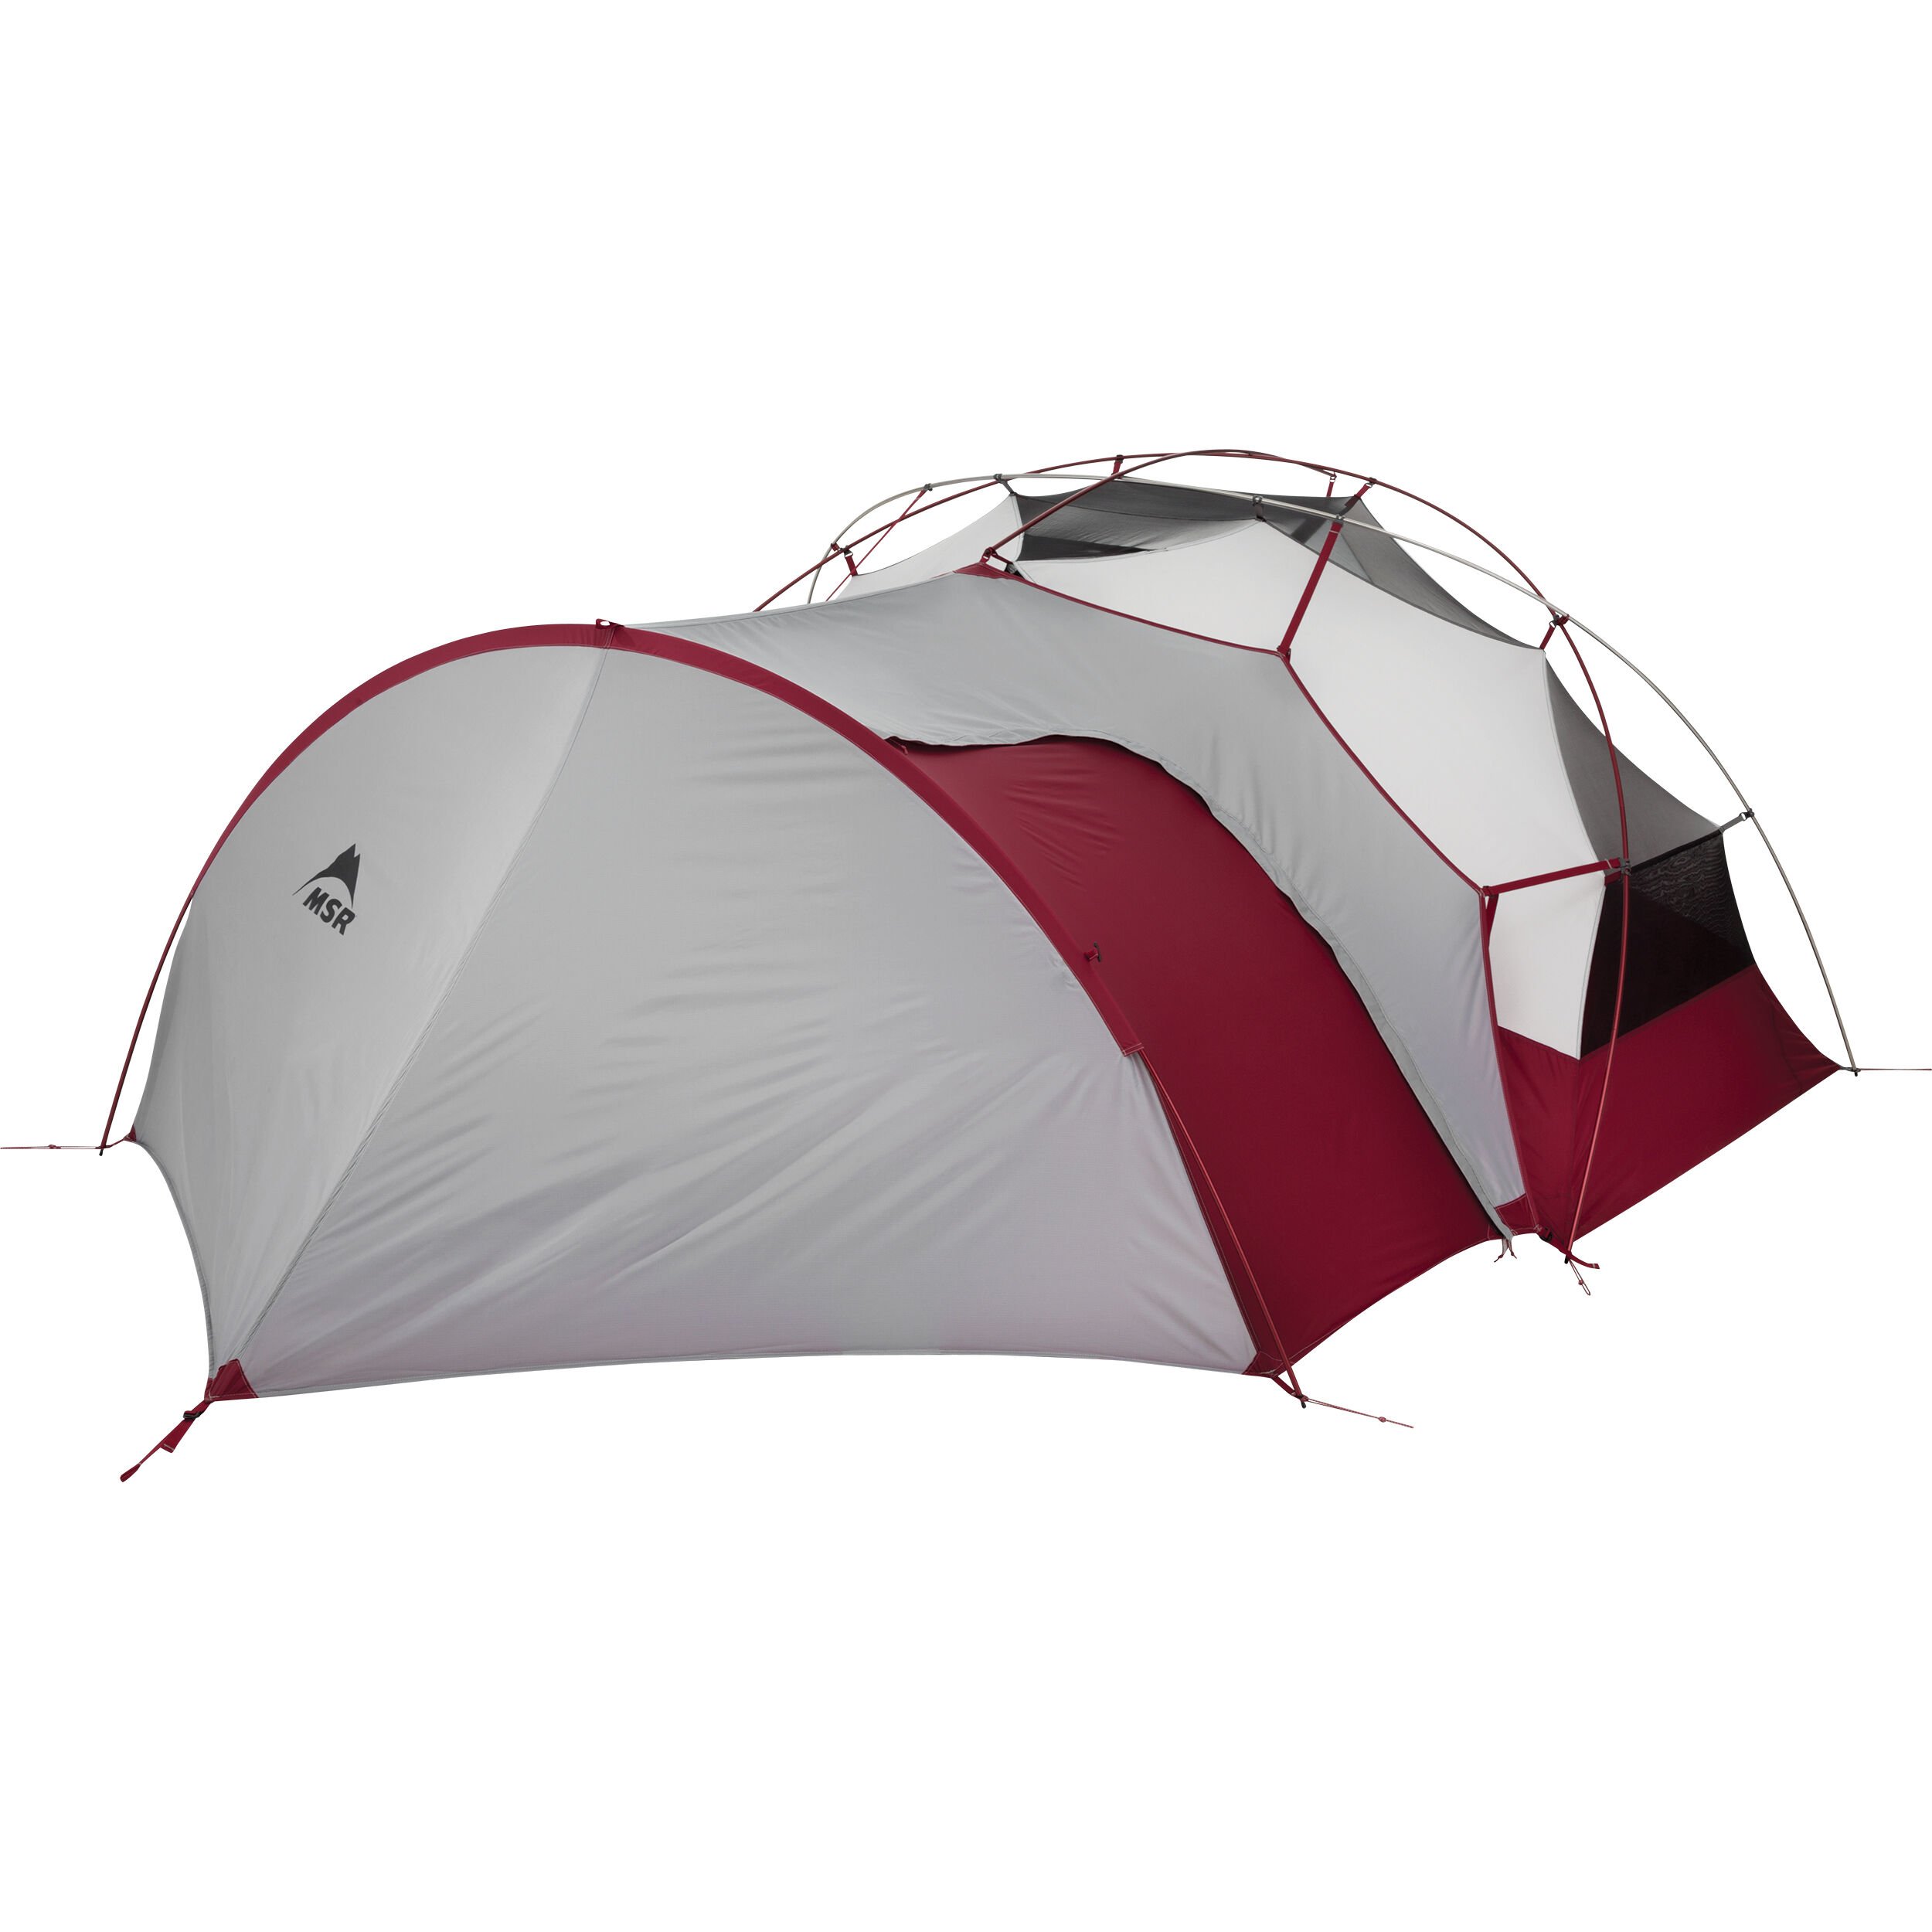 Hubba Hubba™ 2 Legendary 2-Person Backpacking Tent | MSR®